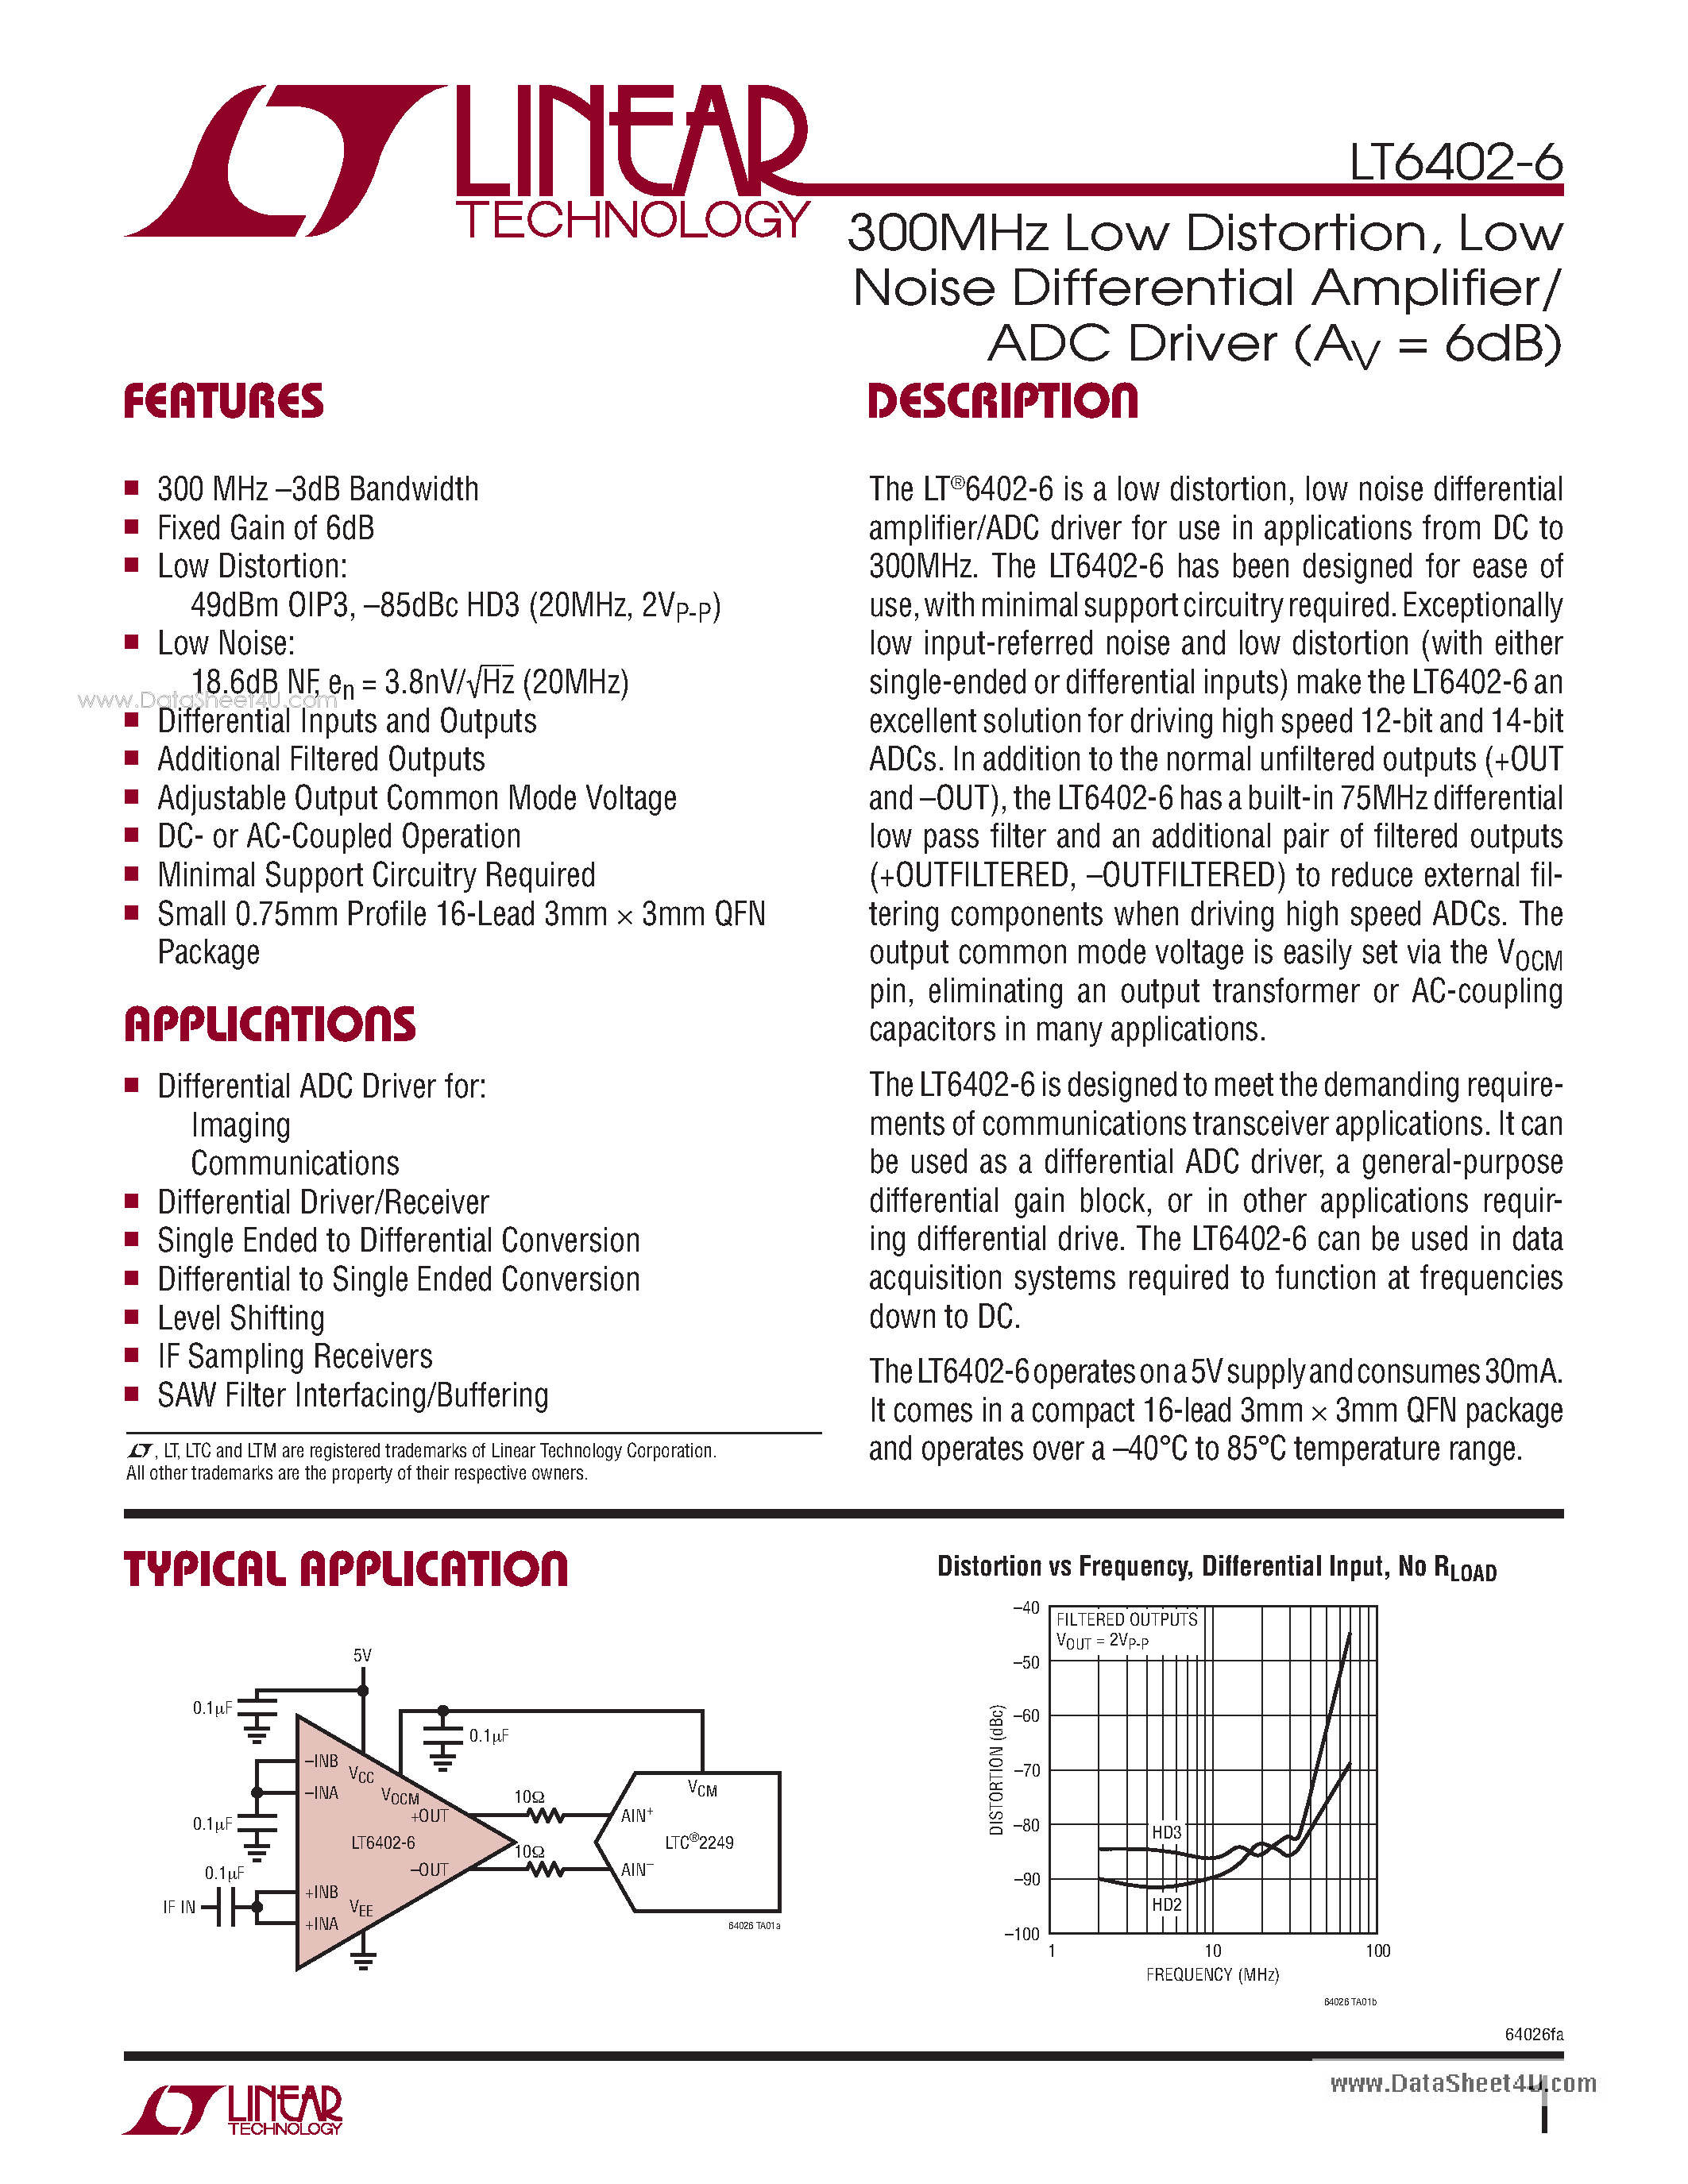 Datasheet LT6402-6 - Low Noise Differential Amplifier/ ADC Driver (AV = 6dB) page 1